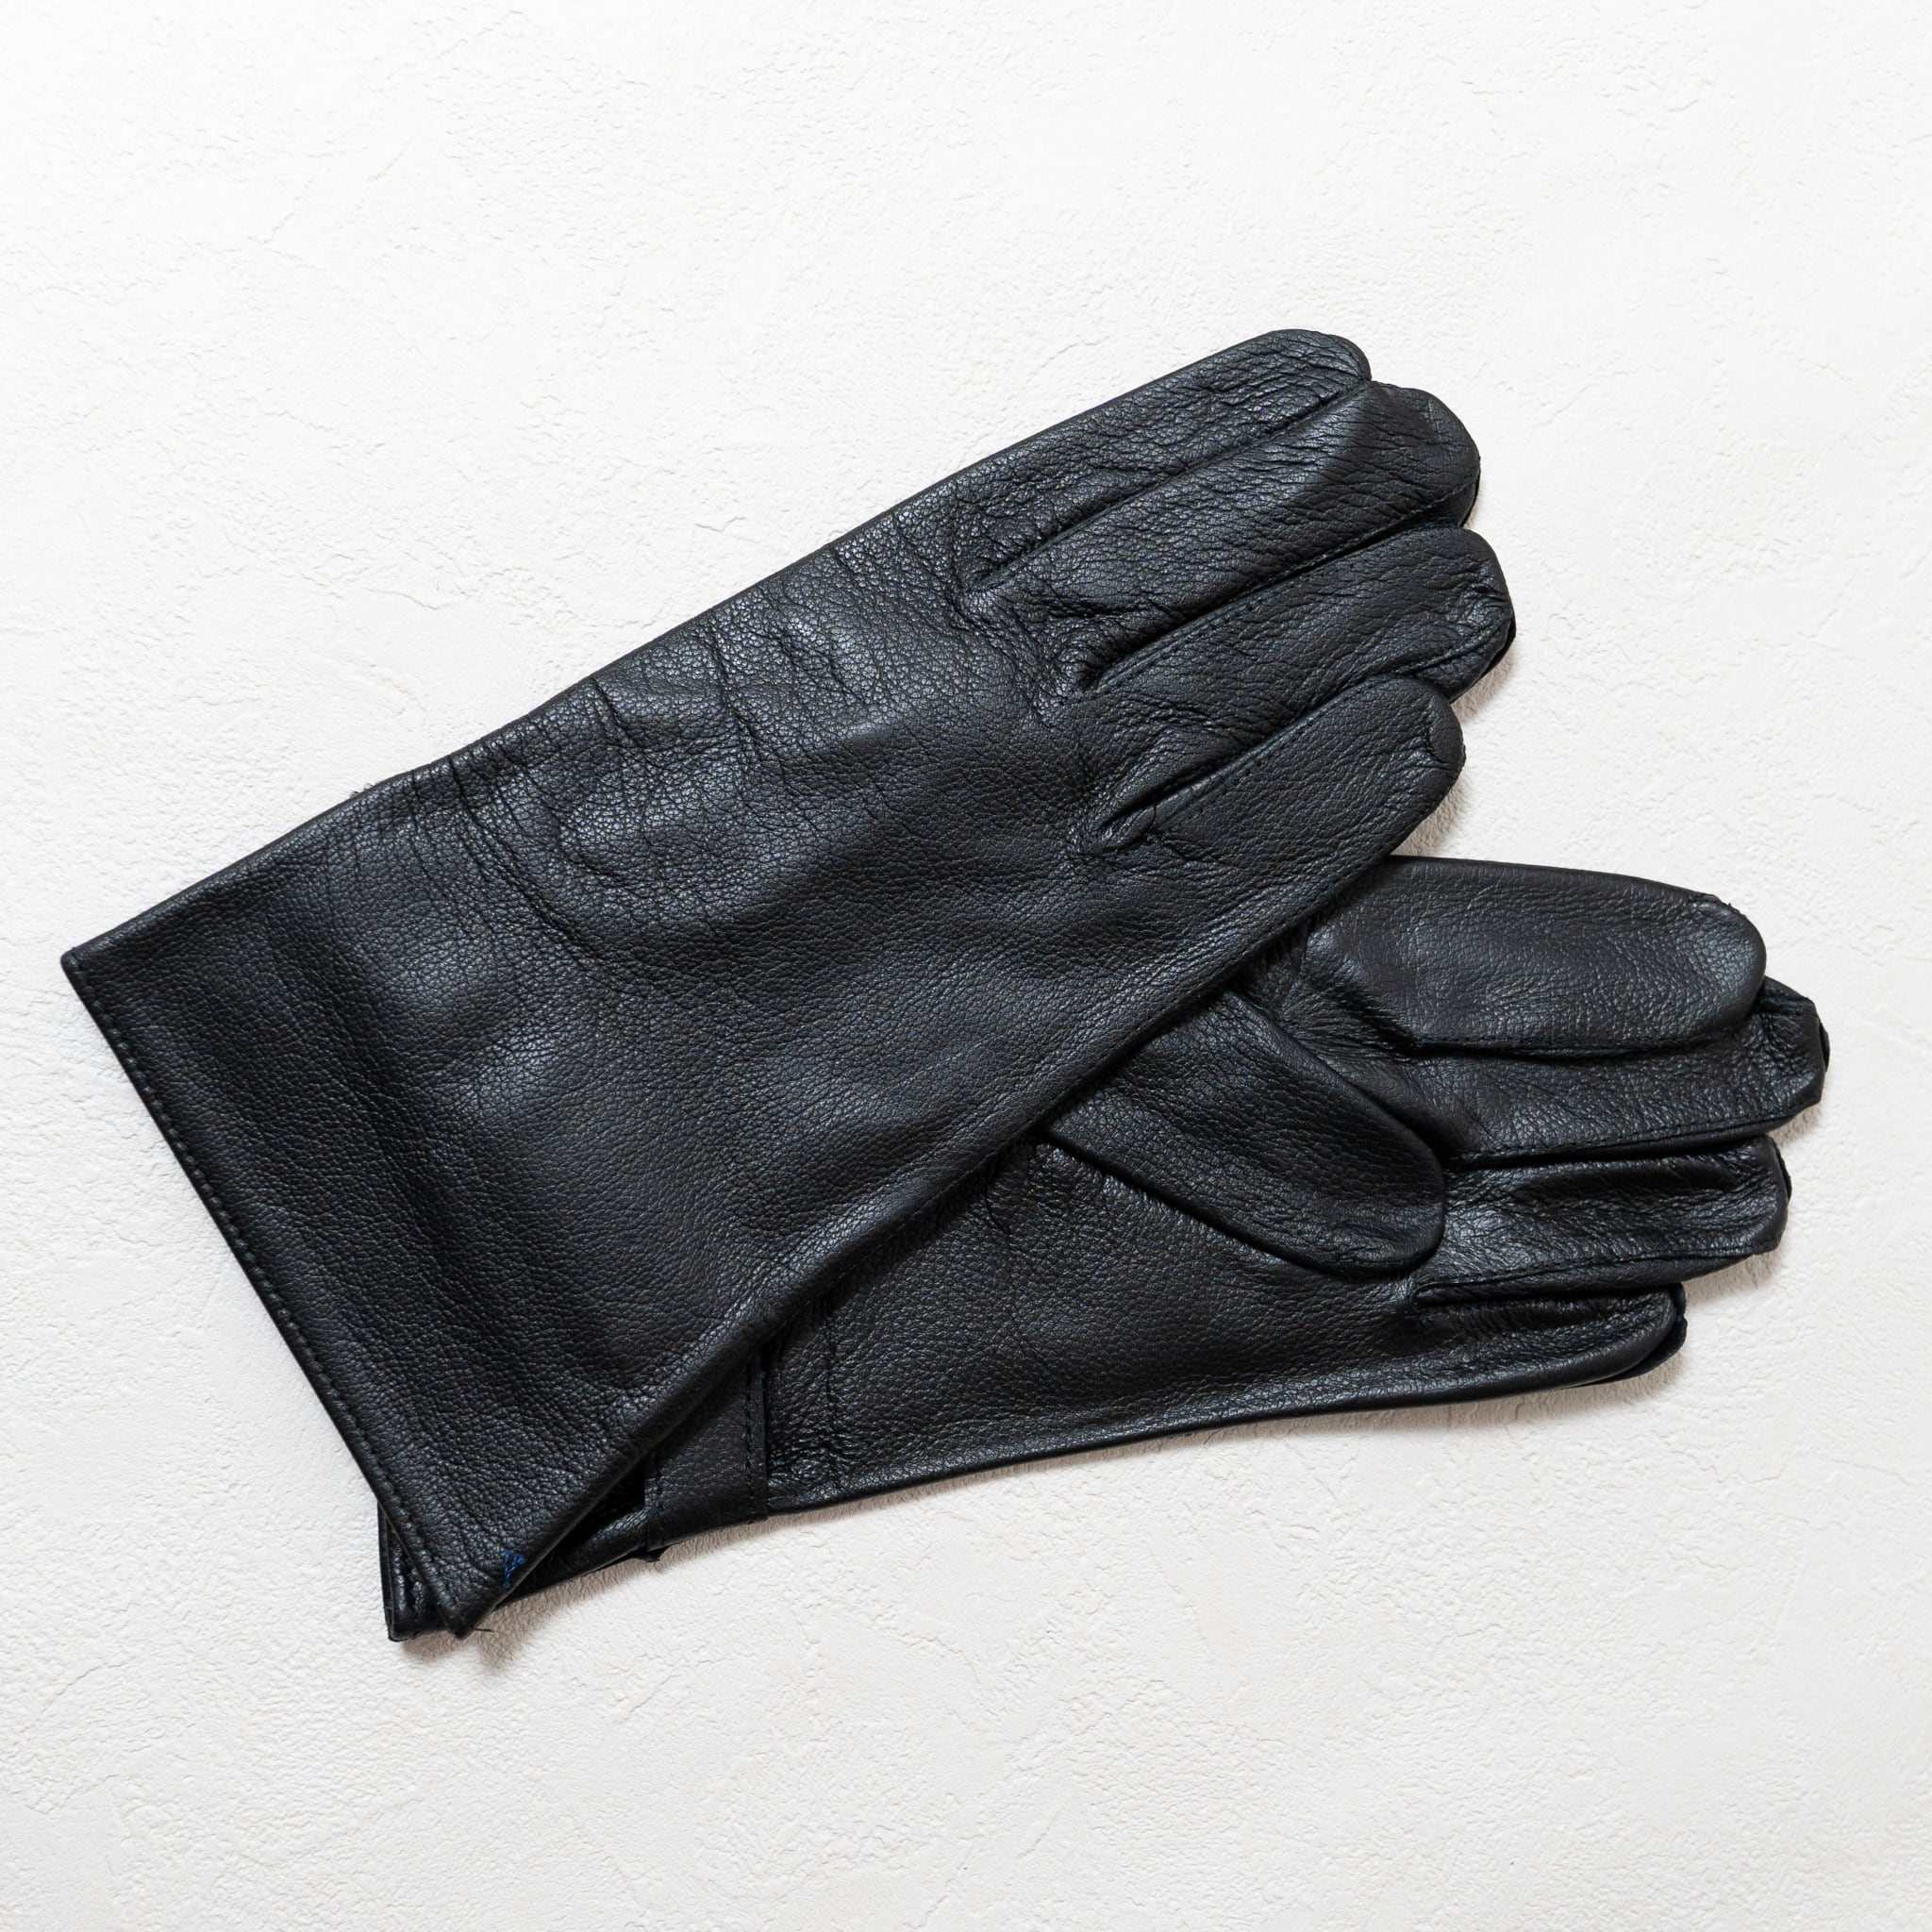 DEADSTOCK】French Army Leather Glove 実物 フランス軍 レザー